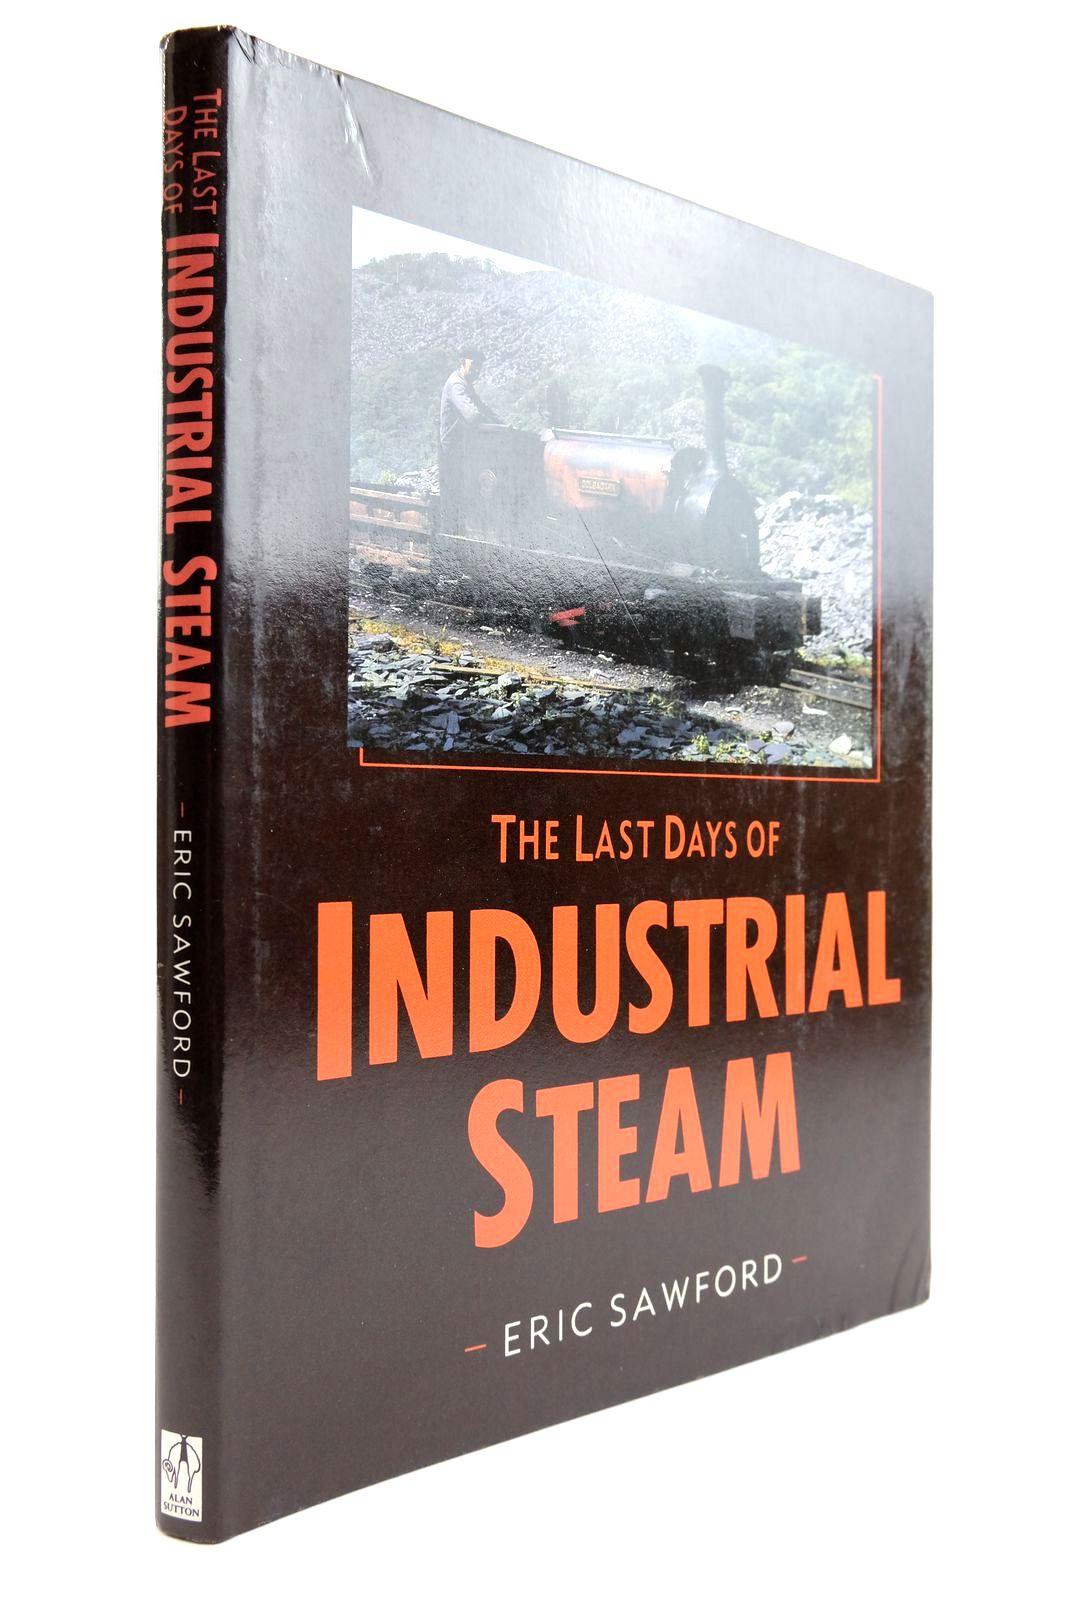 Photo of THE LAST DAYS OF INDUSTRIAL STEAM written by Sawford, Eric published by Alan Sutton (STOCK CODE: 2133622)  for sale by Stella & Rose's Books